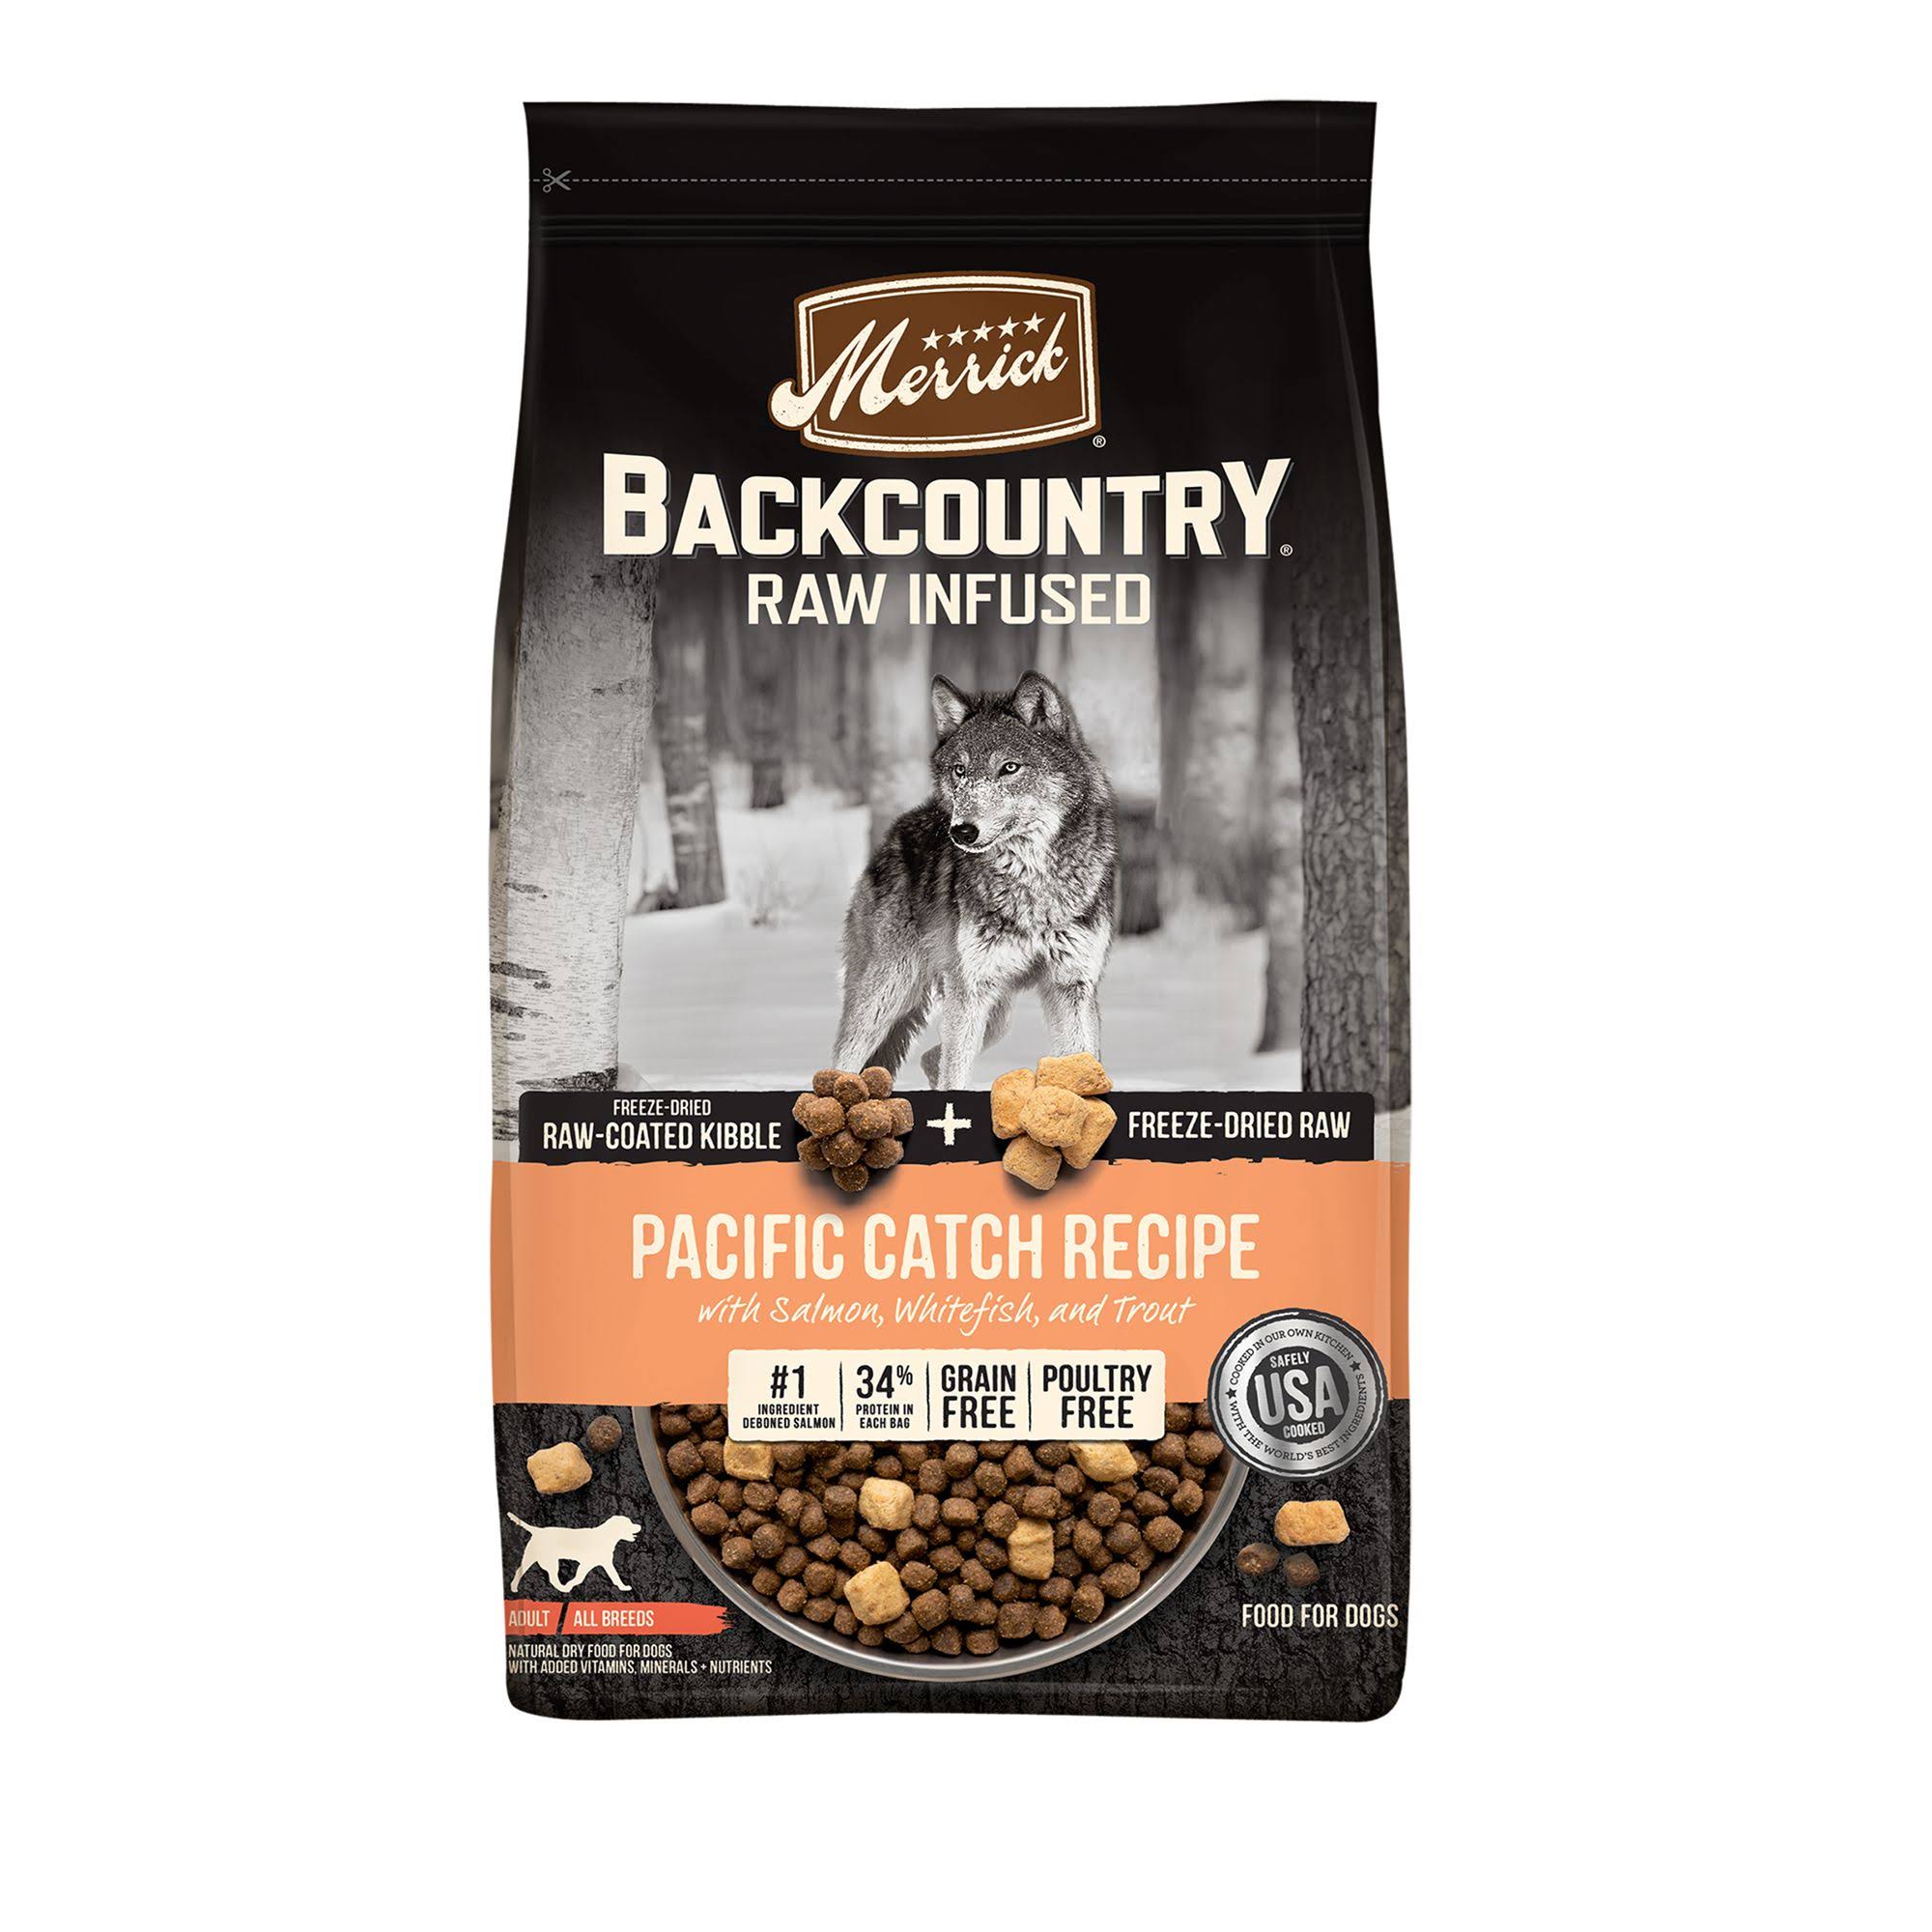 Merrick Backcountry Grain Free Raw Infused Pacific Catch Recipe Dry Dog Food, 20 lbs.